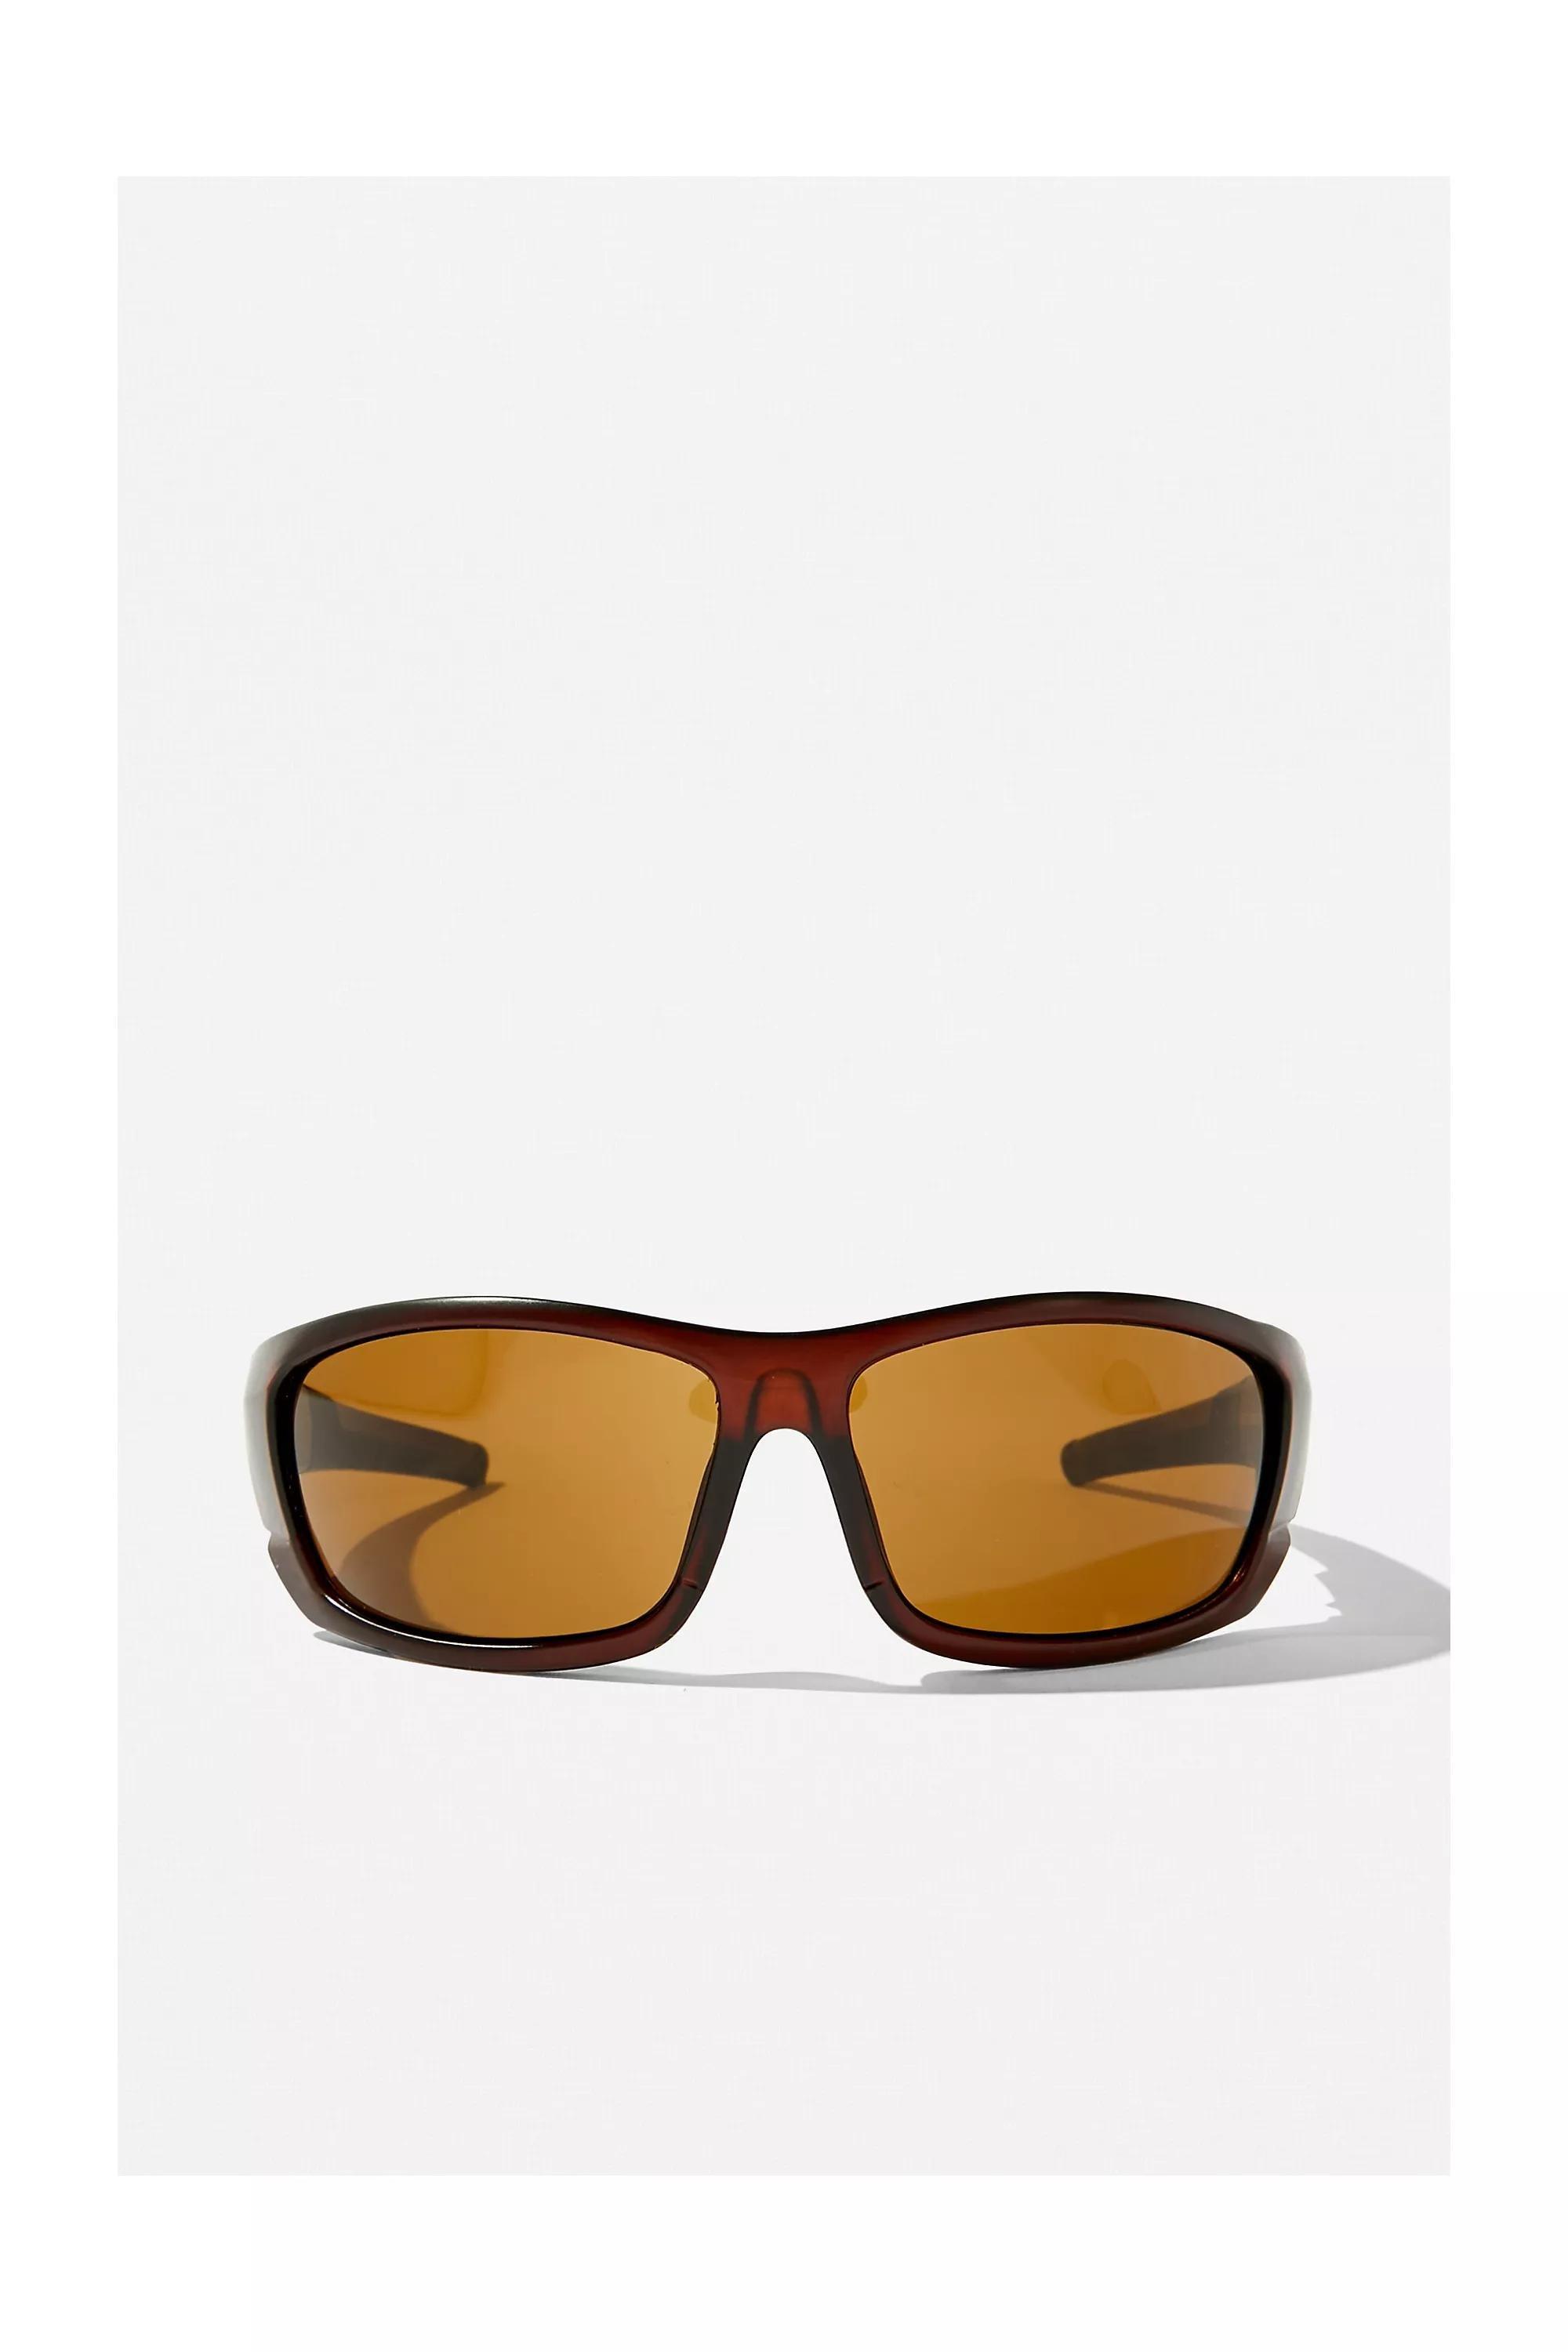 Urban Outfitters - Brown Leni Sunglasses